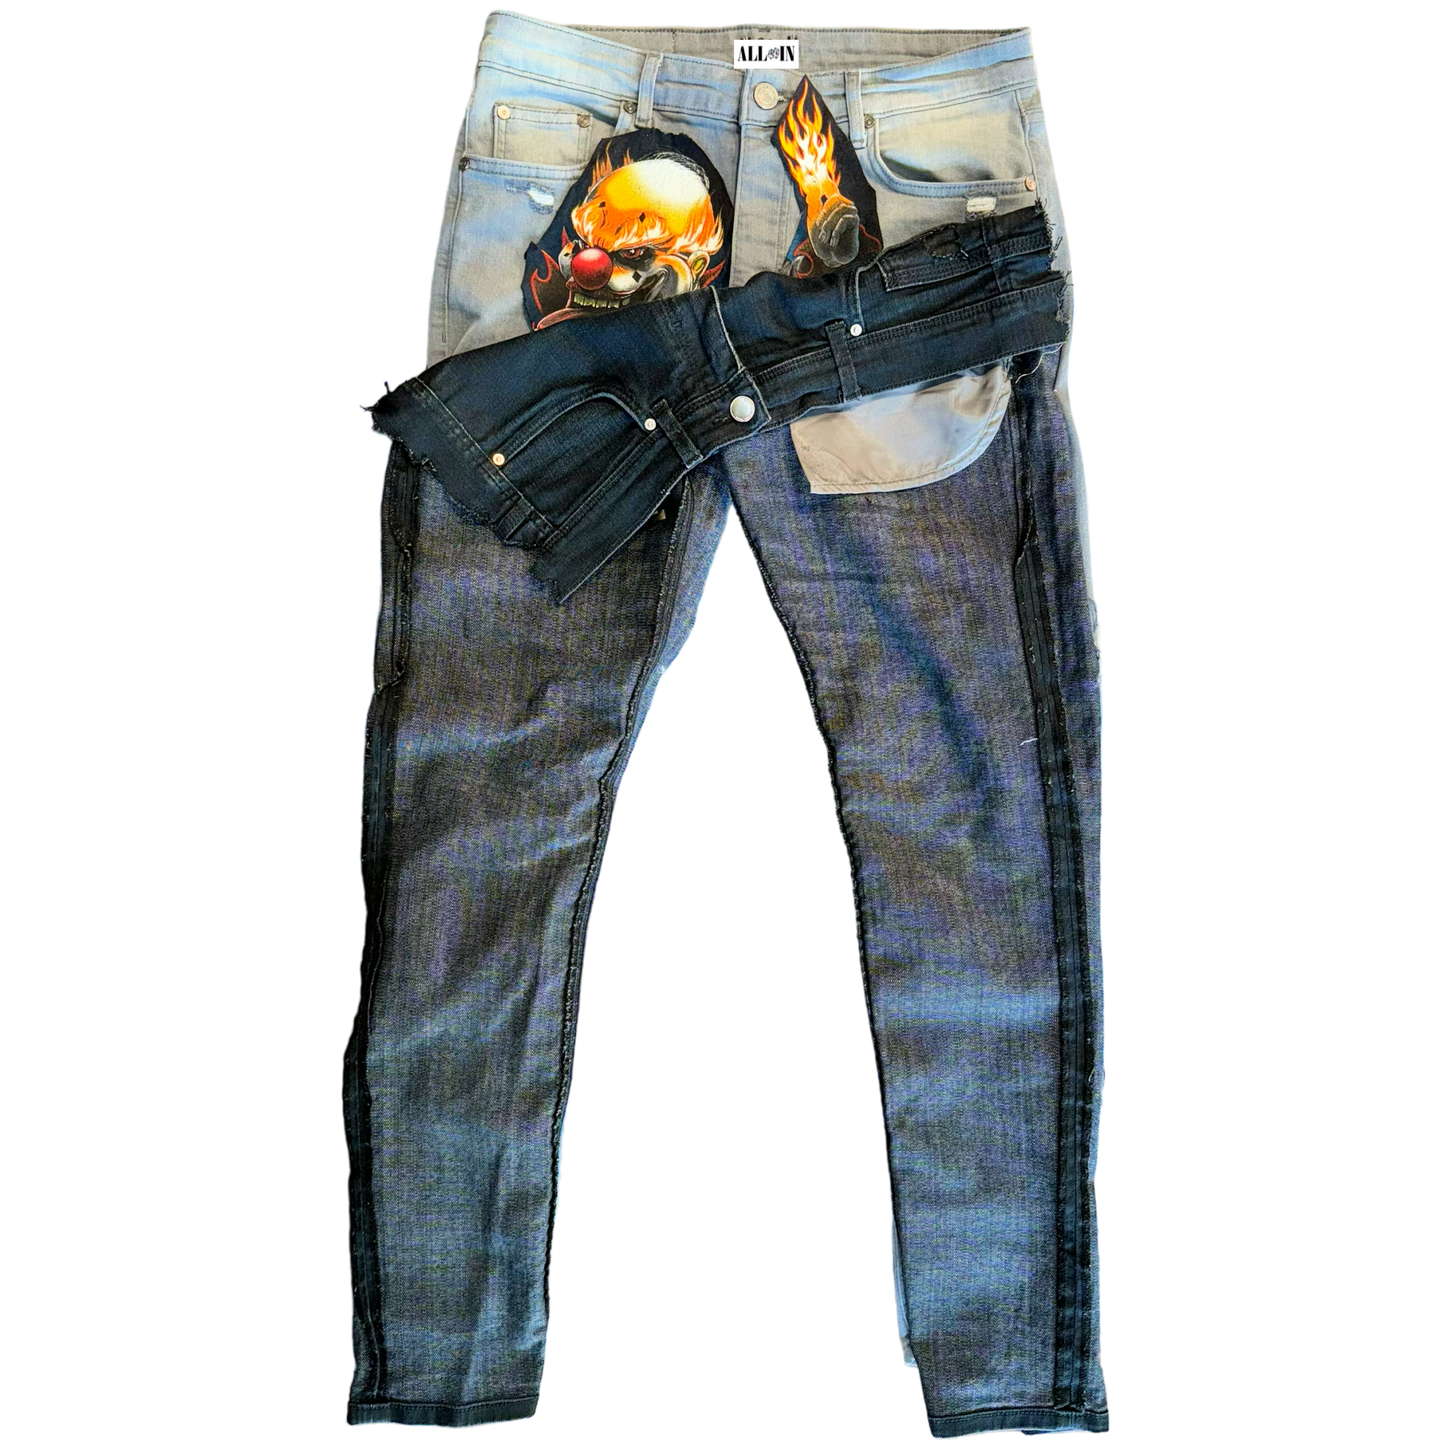 Inside Out Overflap Patched Jeans